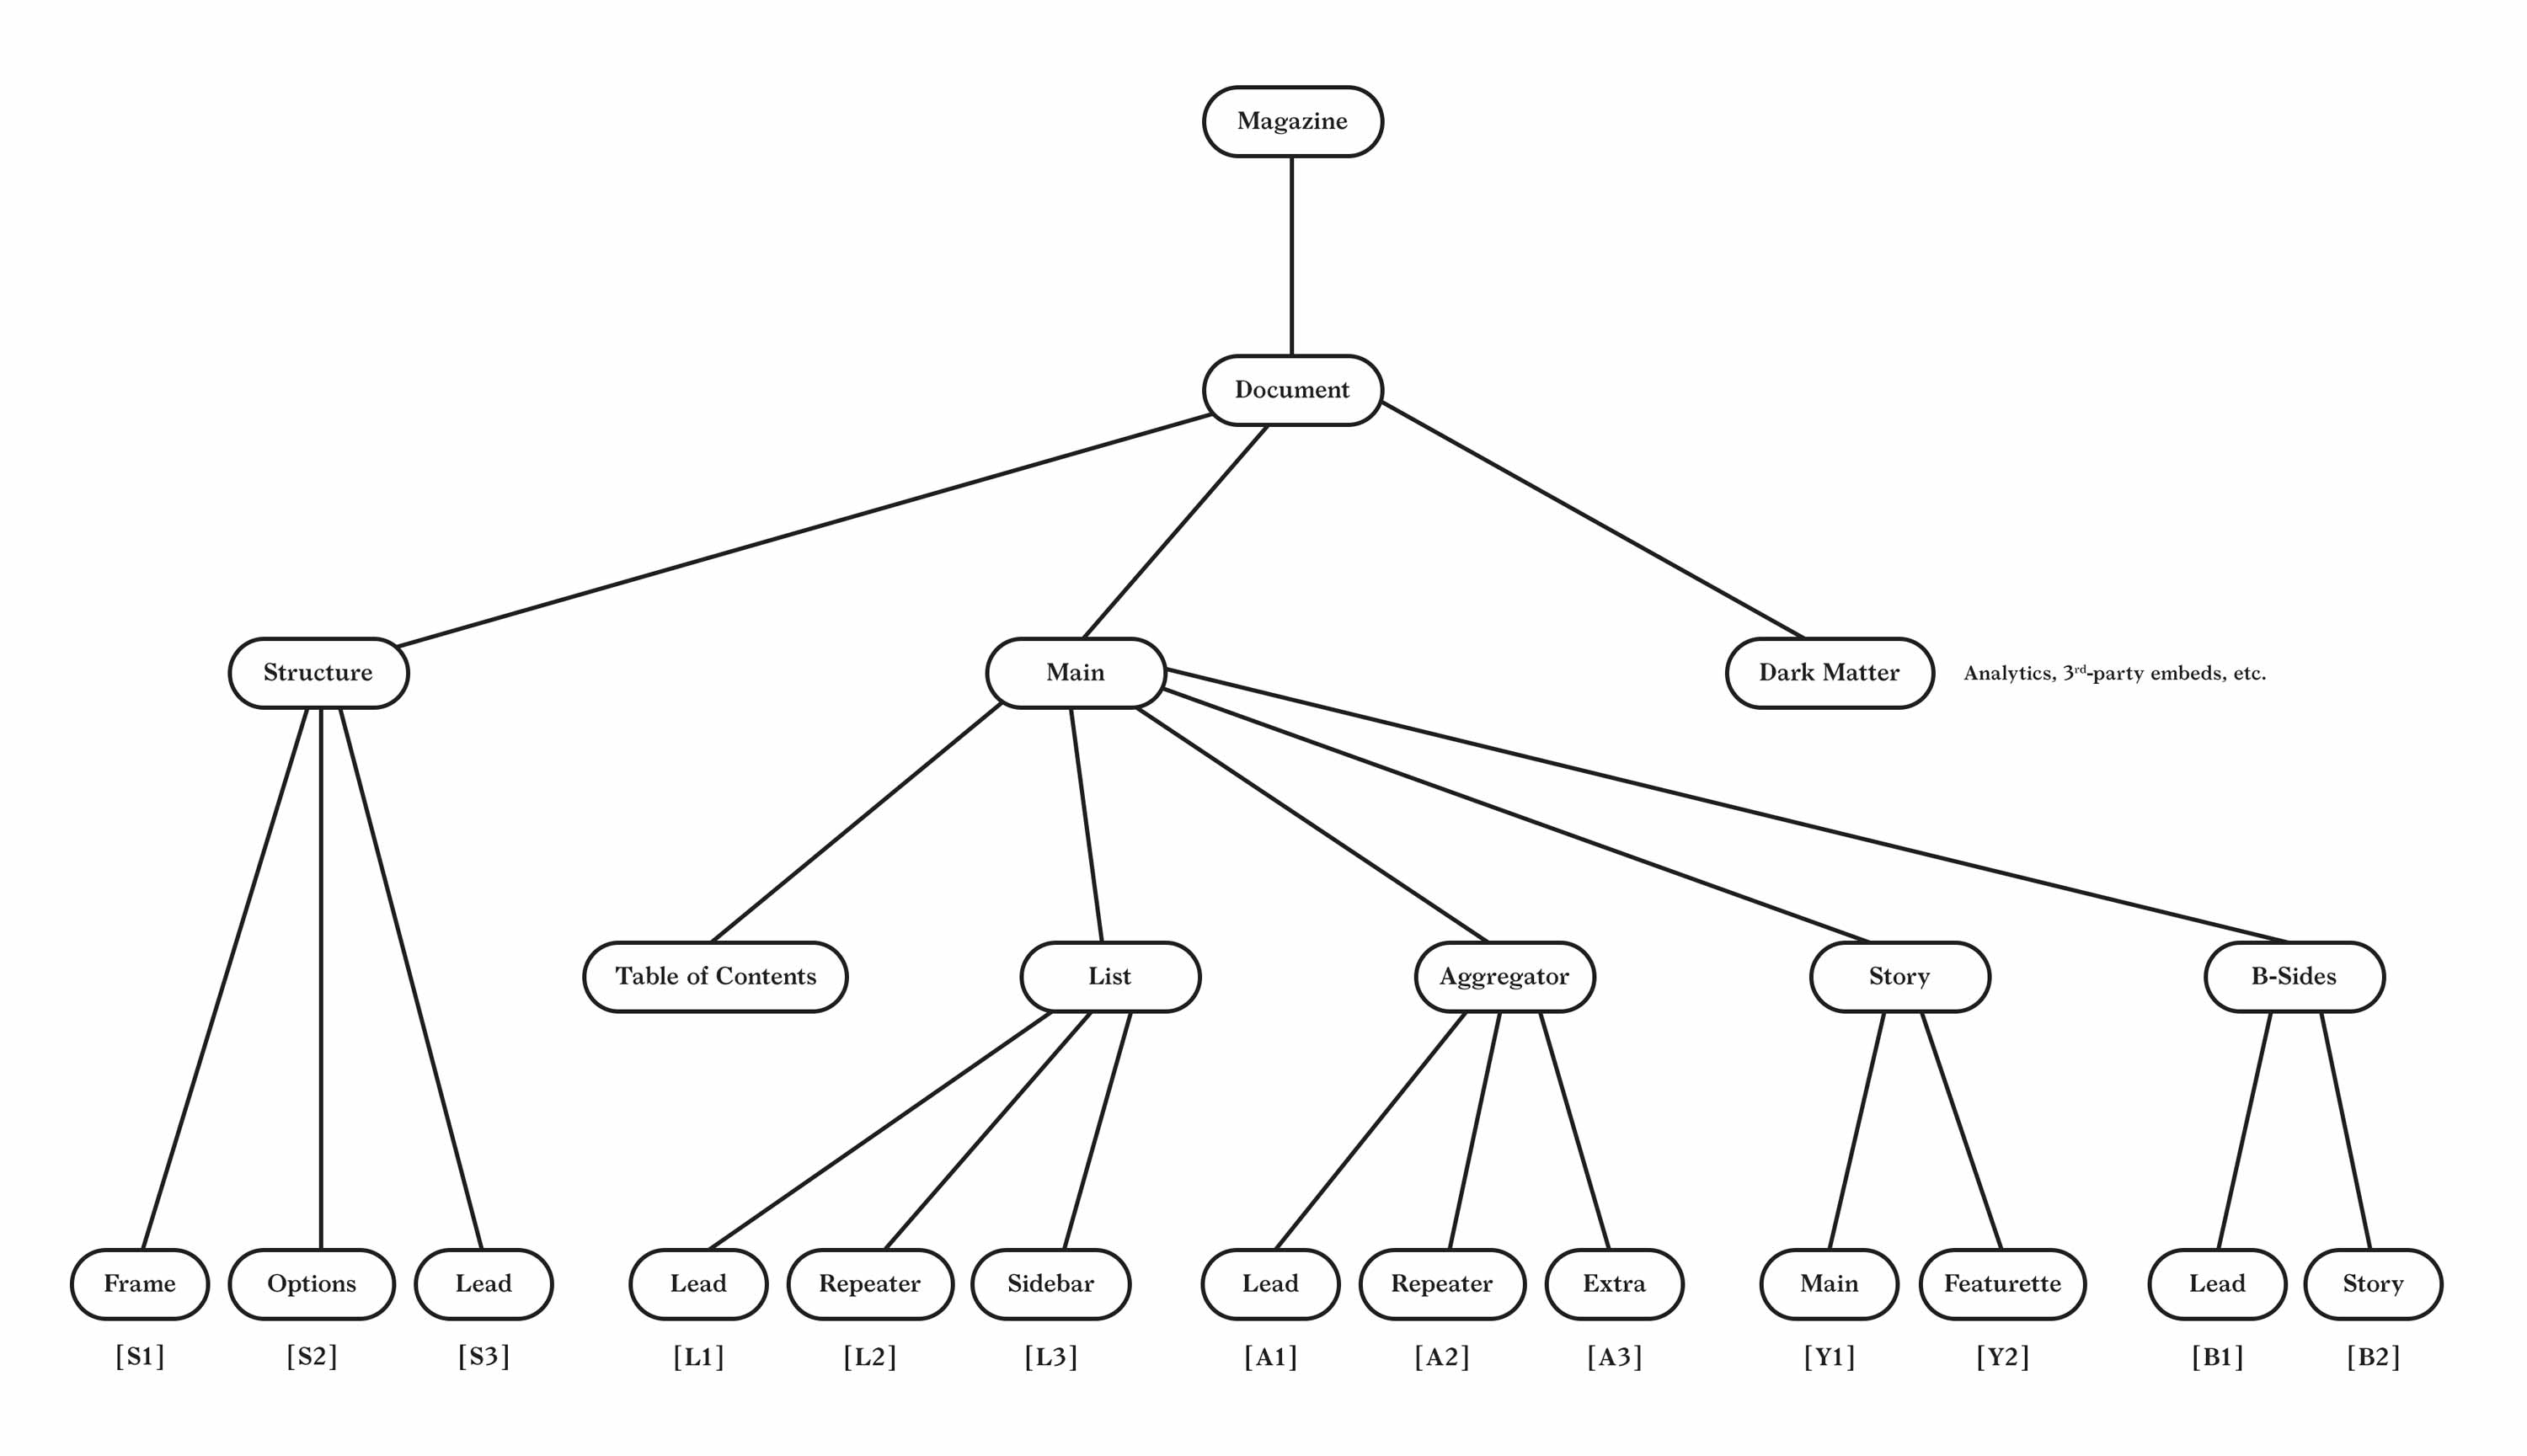 A tree diagram showing content and component relationships and hierarchy.